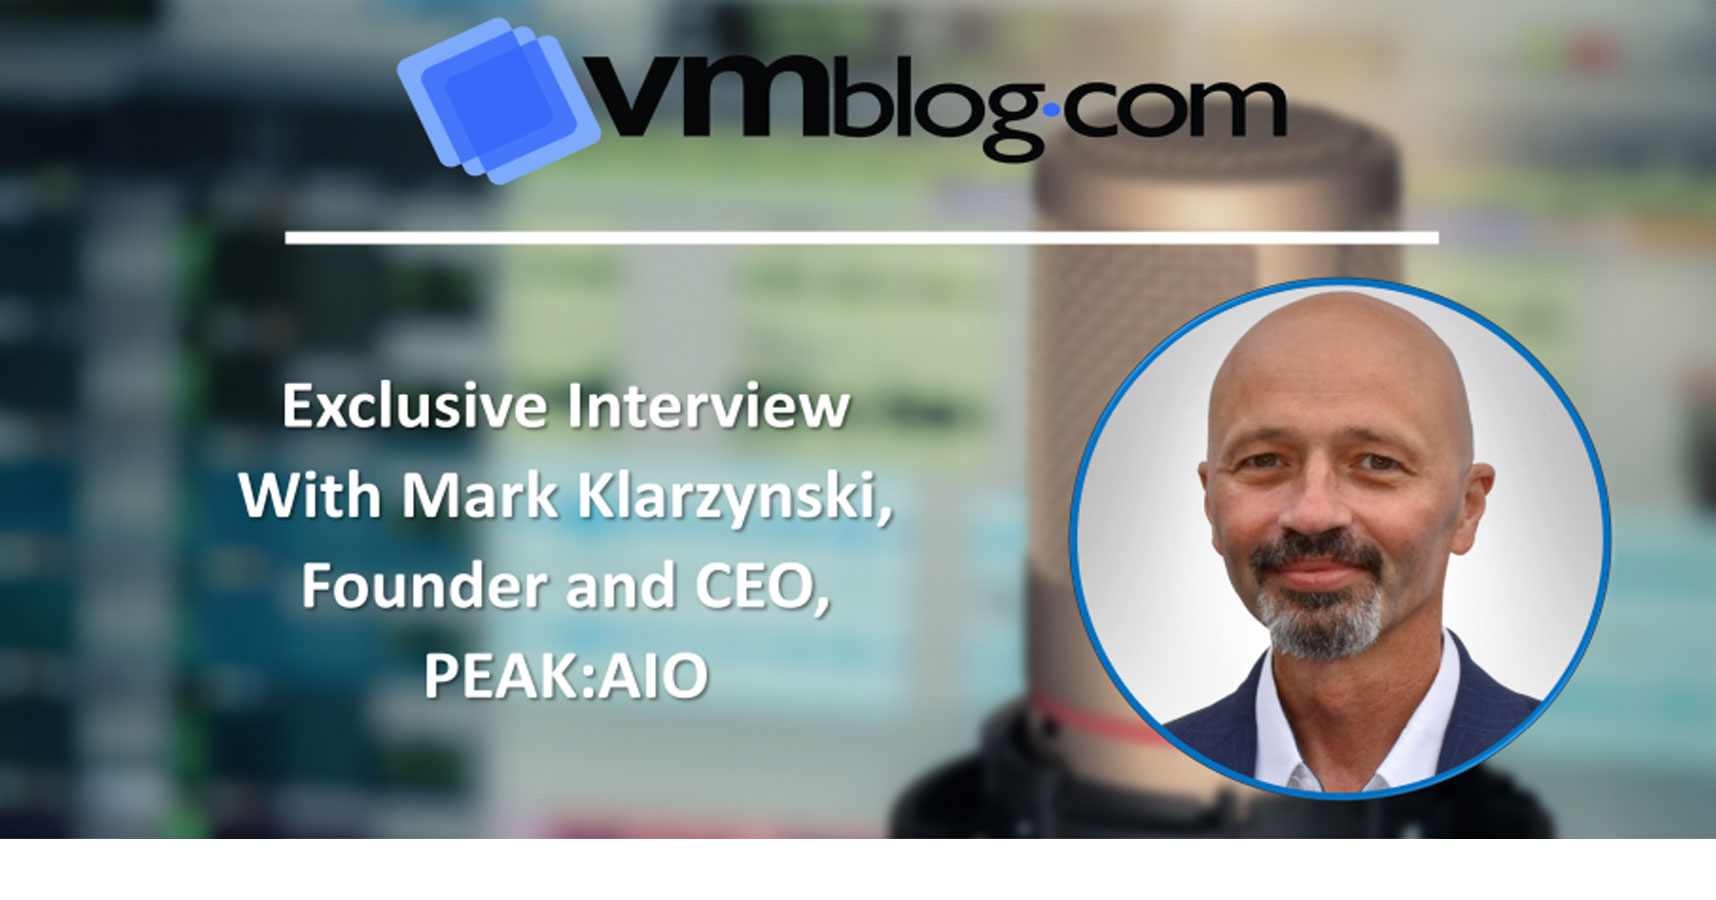 Exclusive Interview with Mark Klarzynski, Founder and CEO, PEAK:AIO